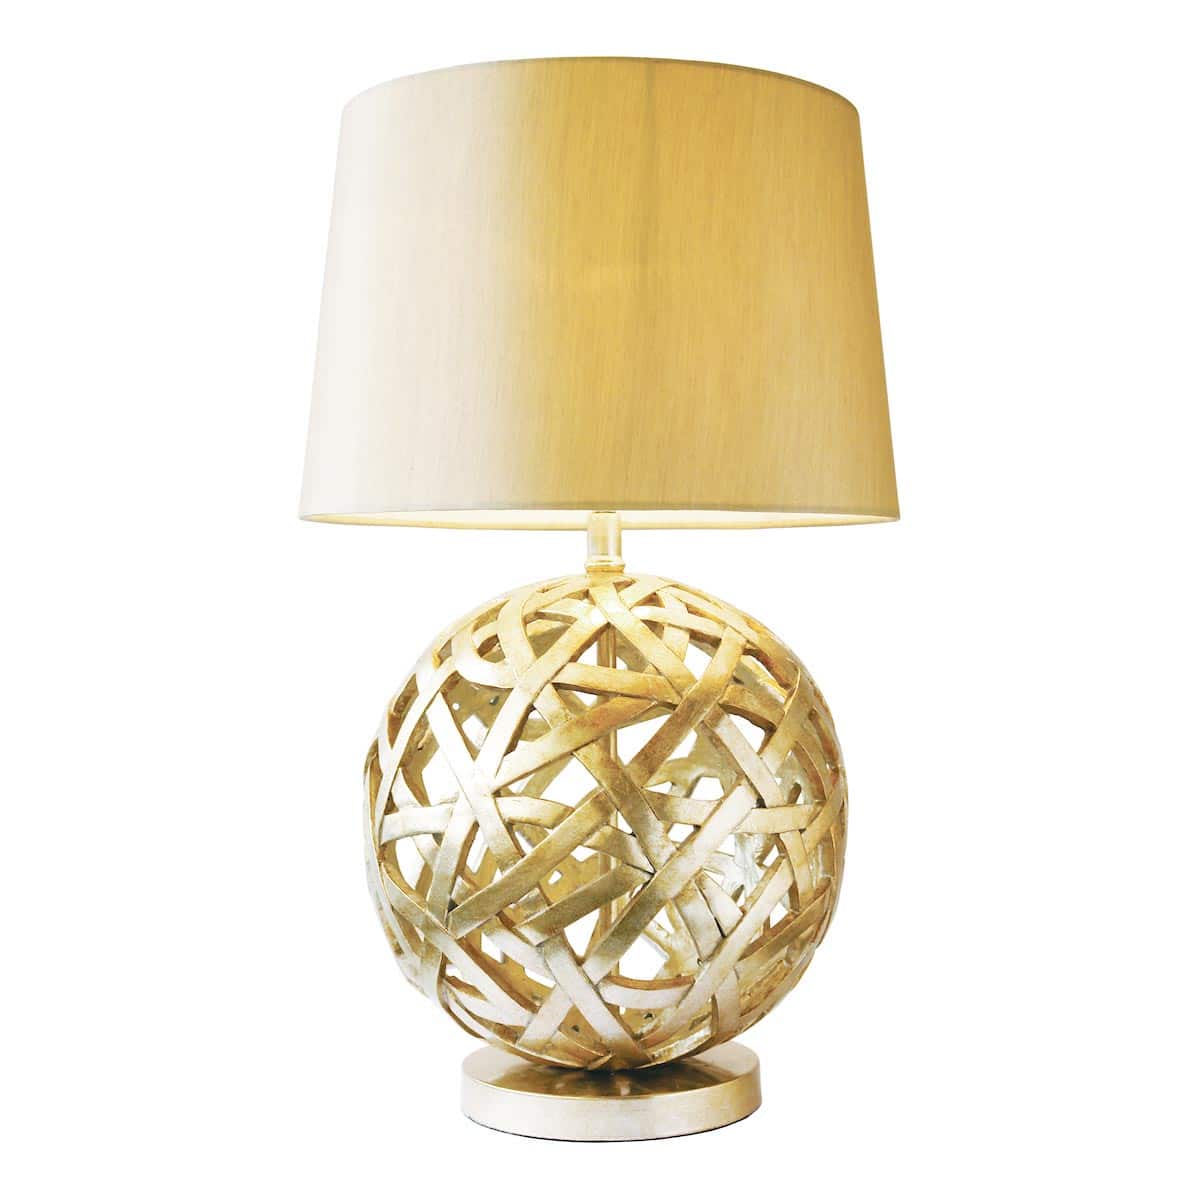 Dar Balthazar 1 Light Globe Table Lamp Antique Gold With Shade